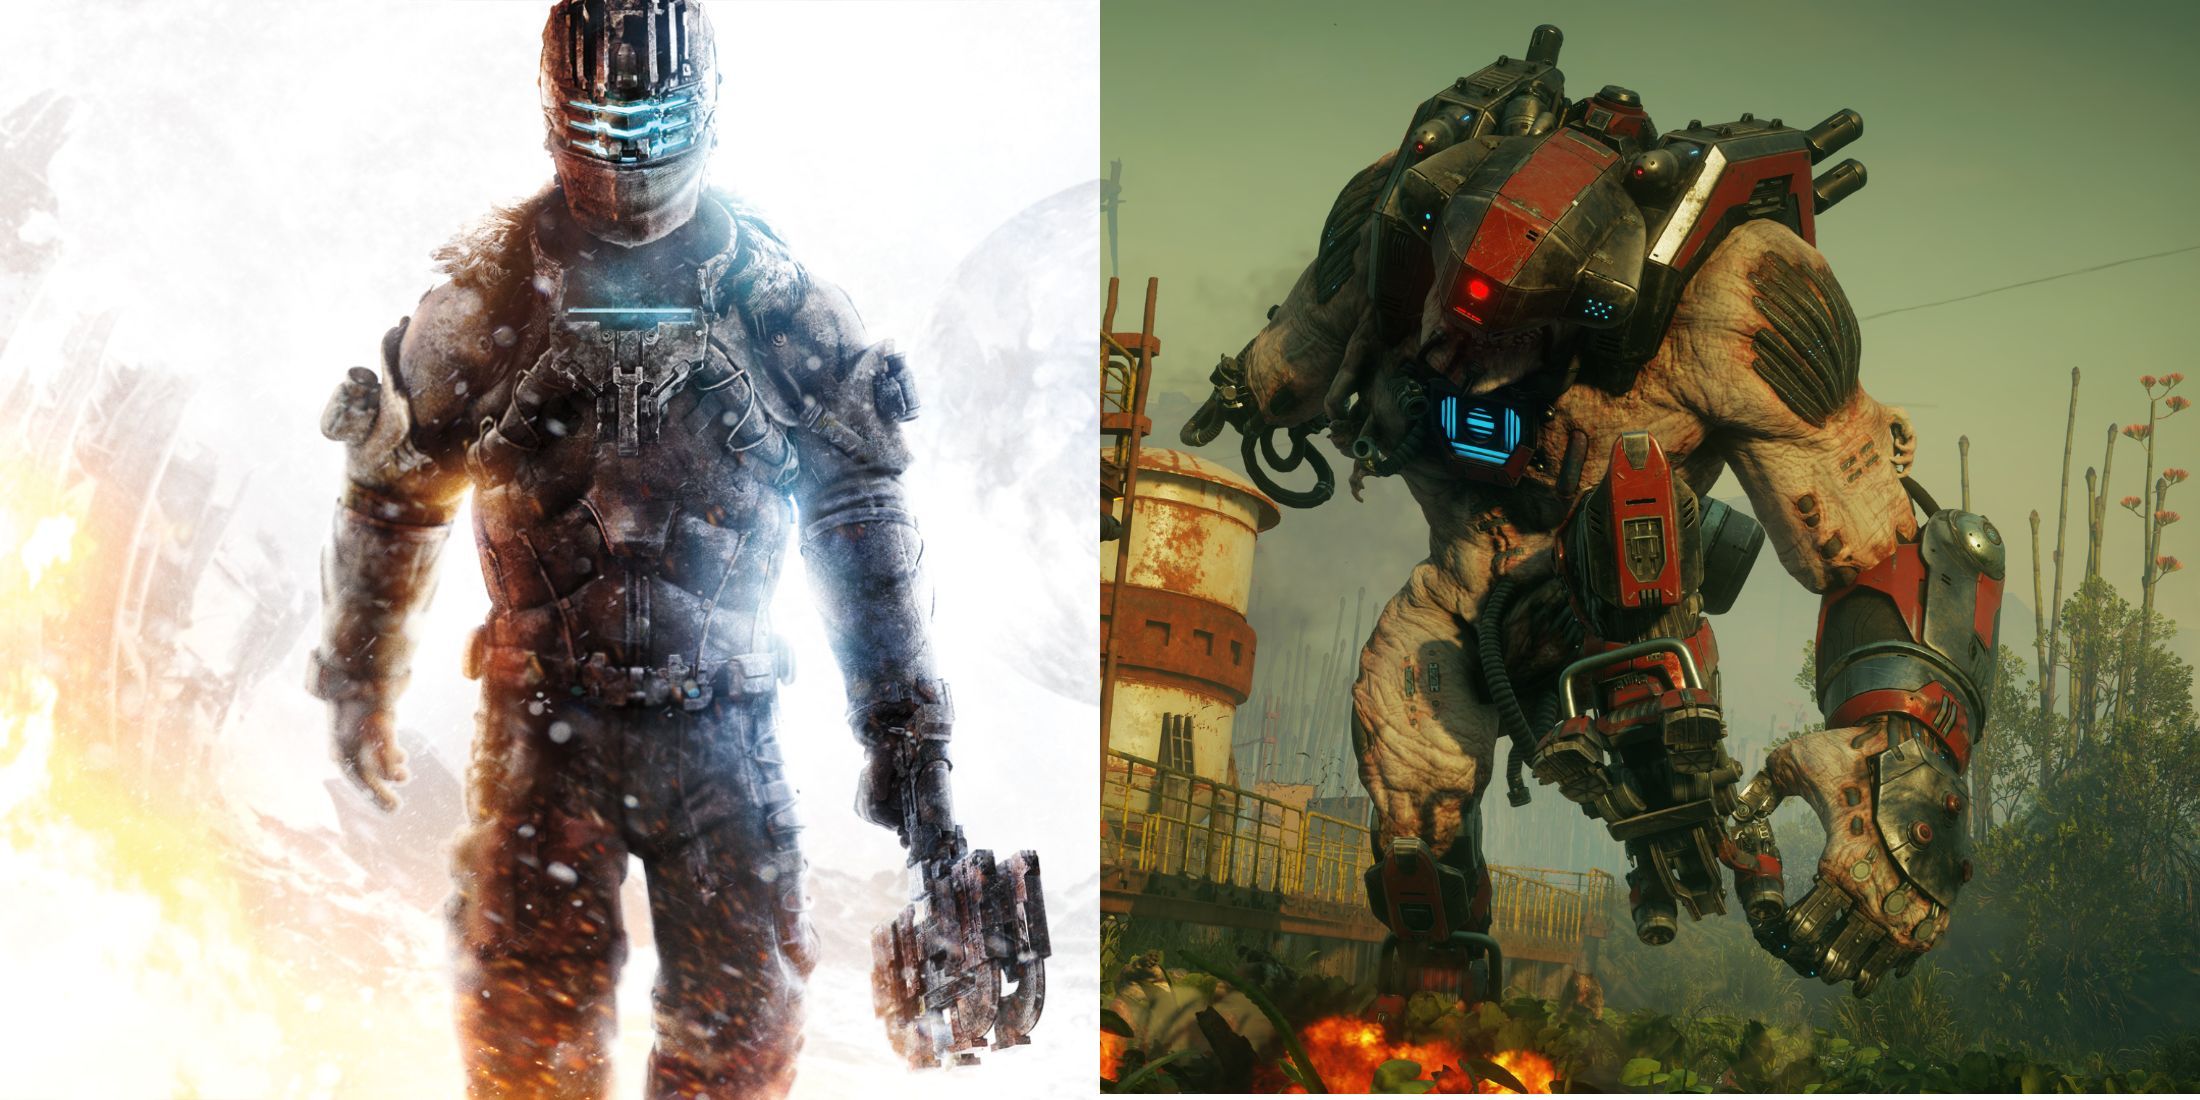 dead space 3 and rage 2 cover art side by side.